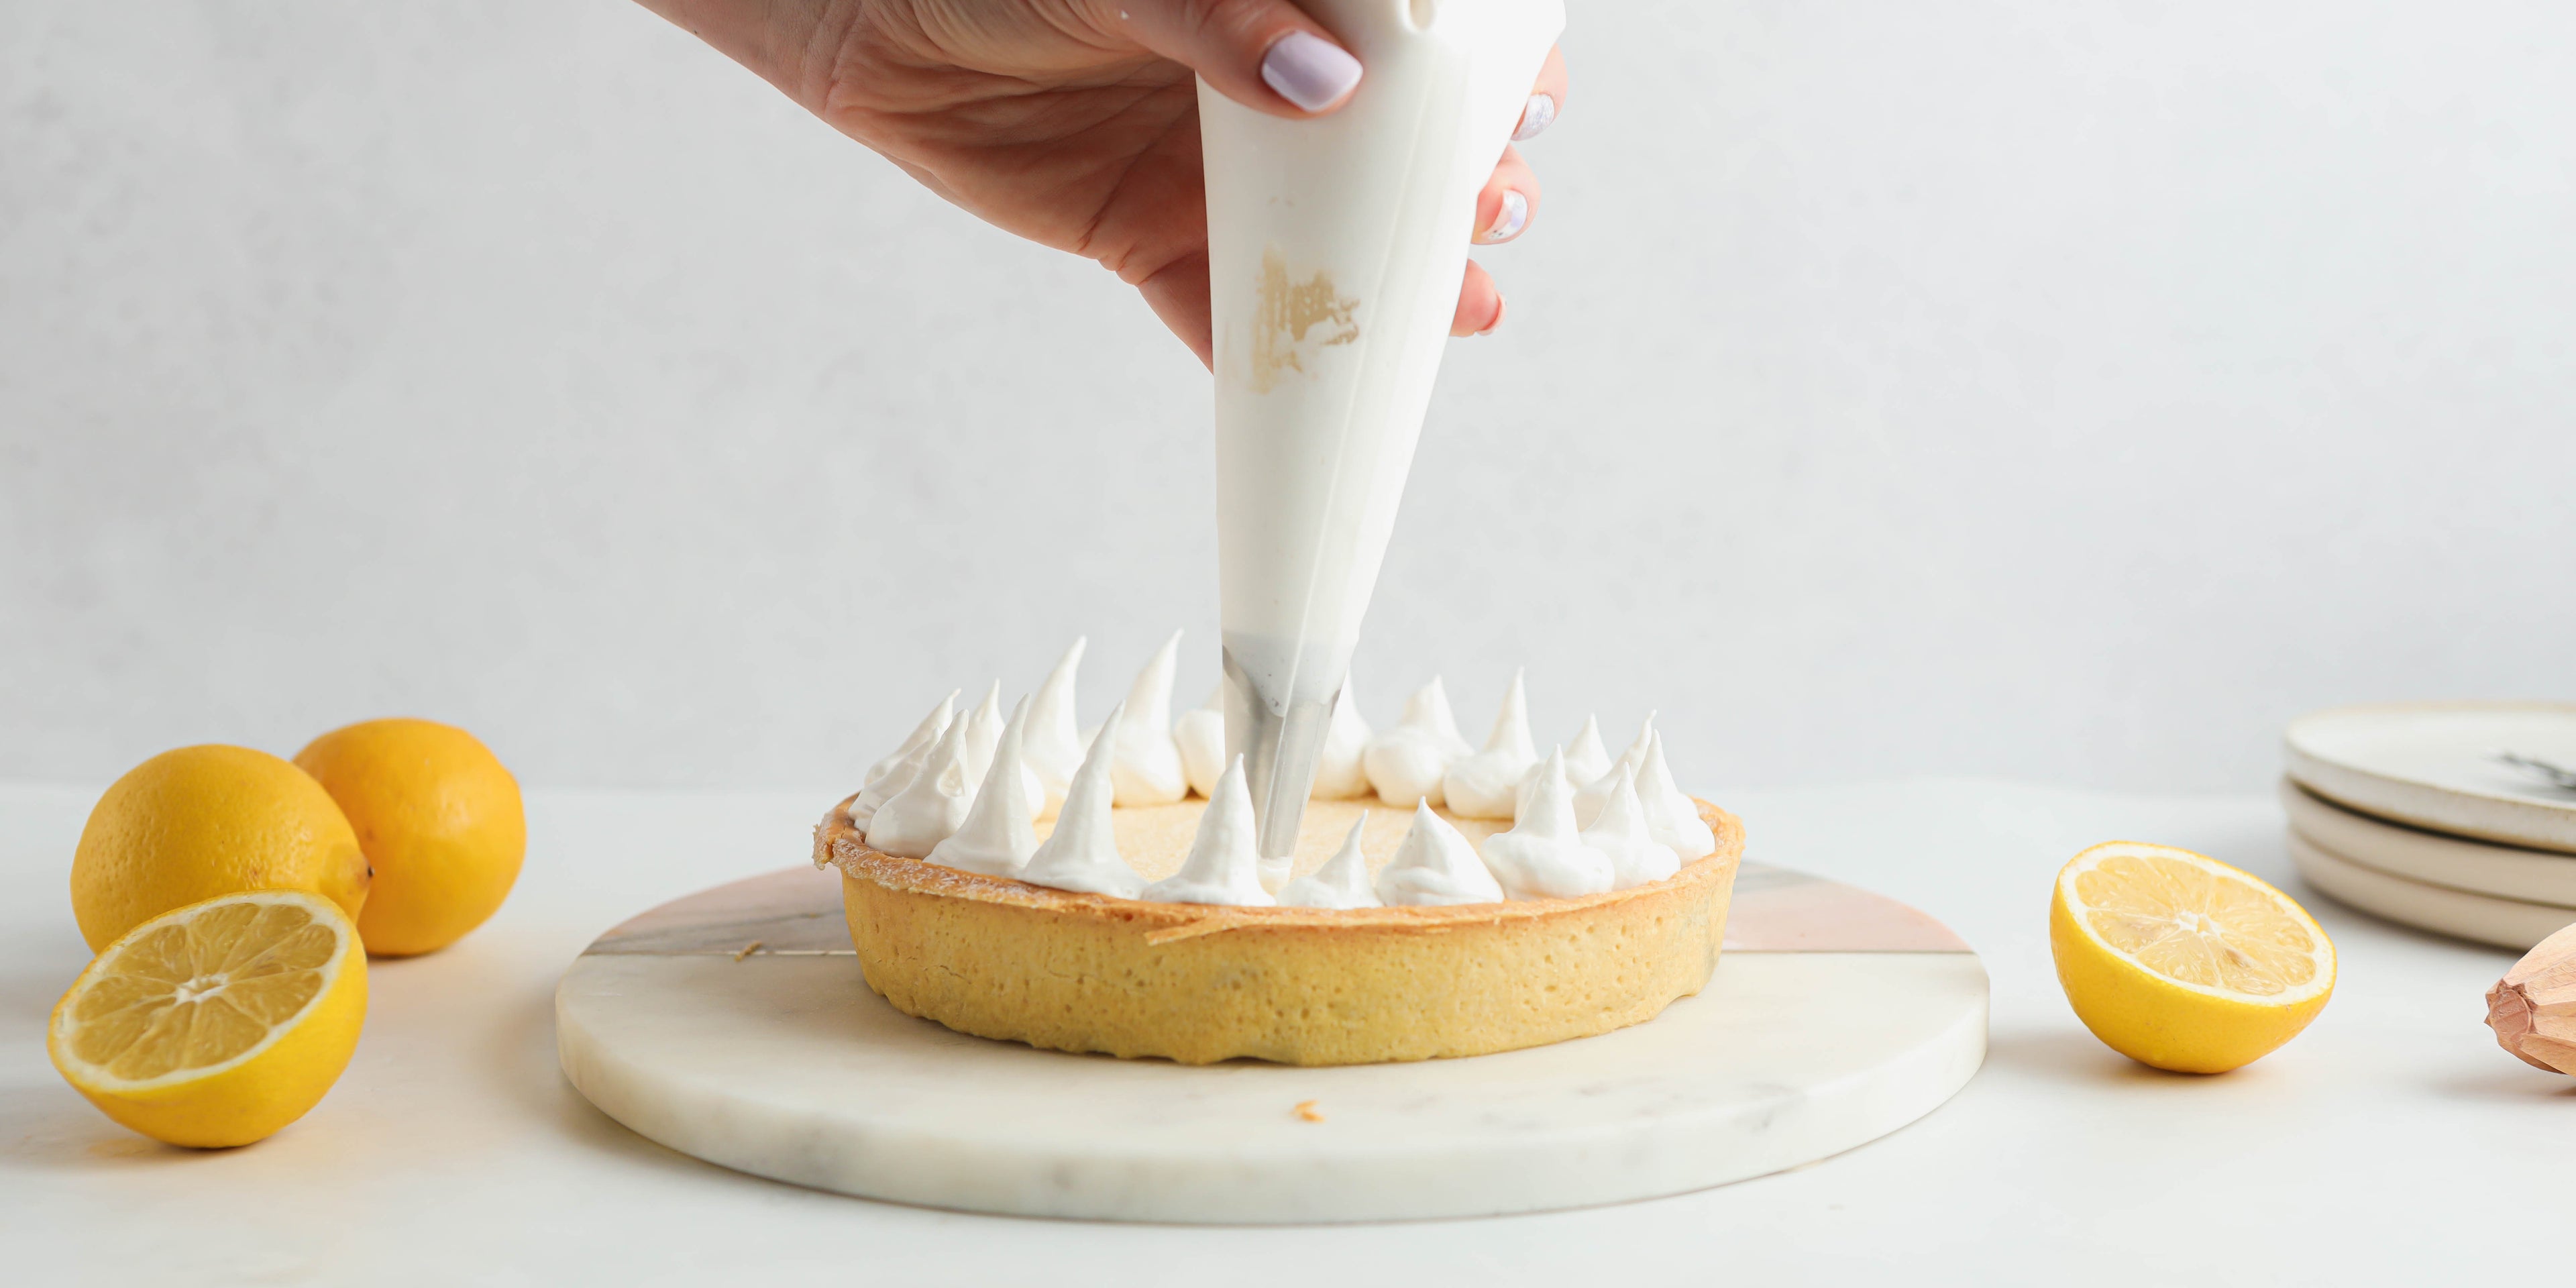 A hand holding a piping bag, piping meringue on top of a lemon pie with lemon slices around it and a stack of whites plates in the background